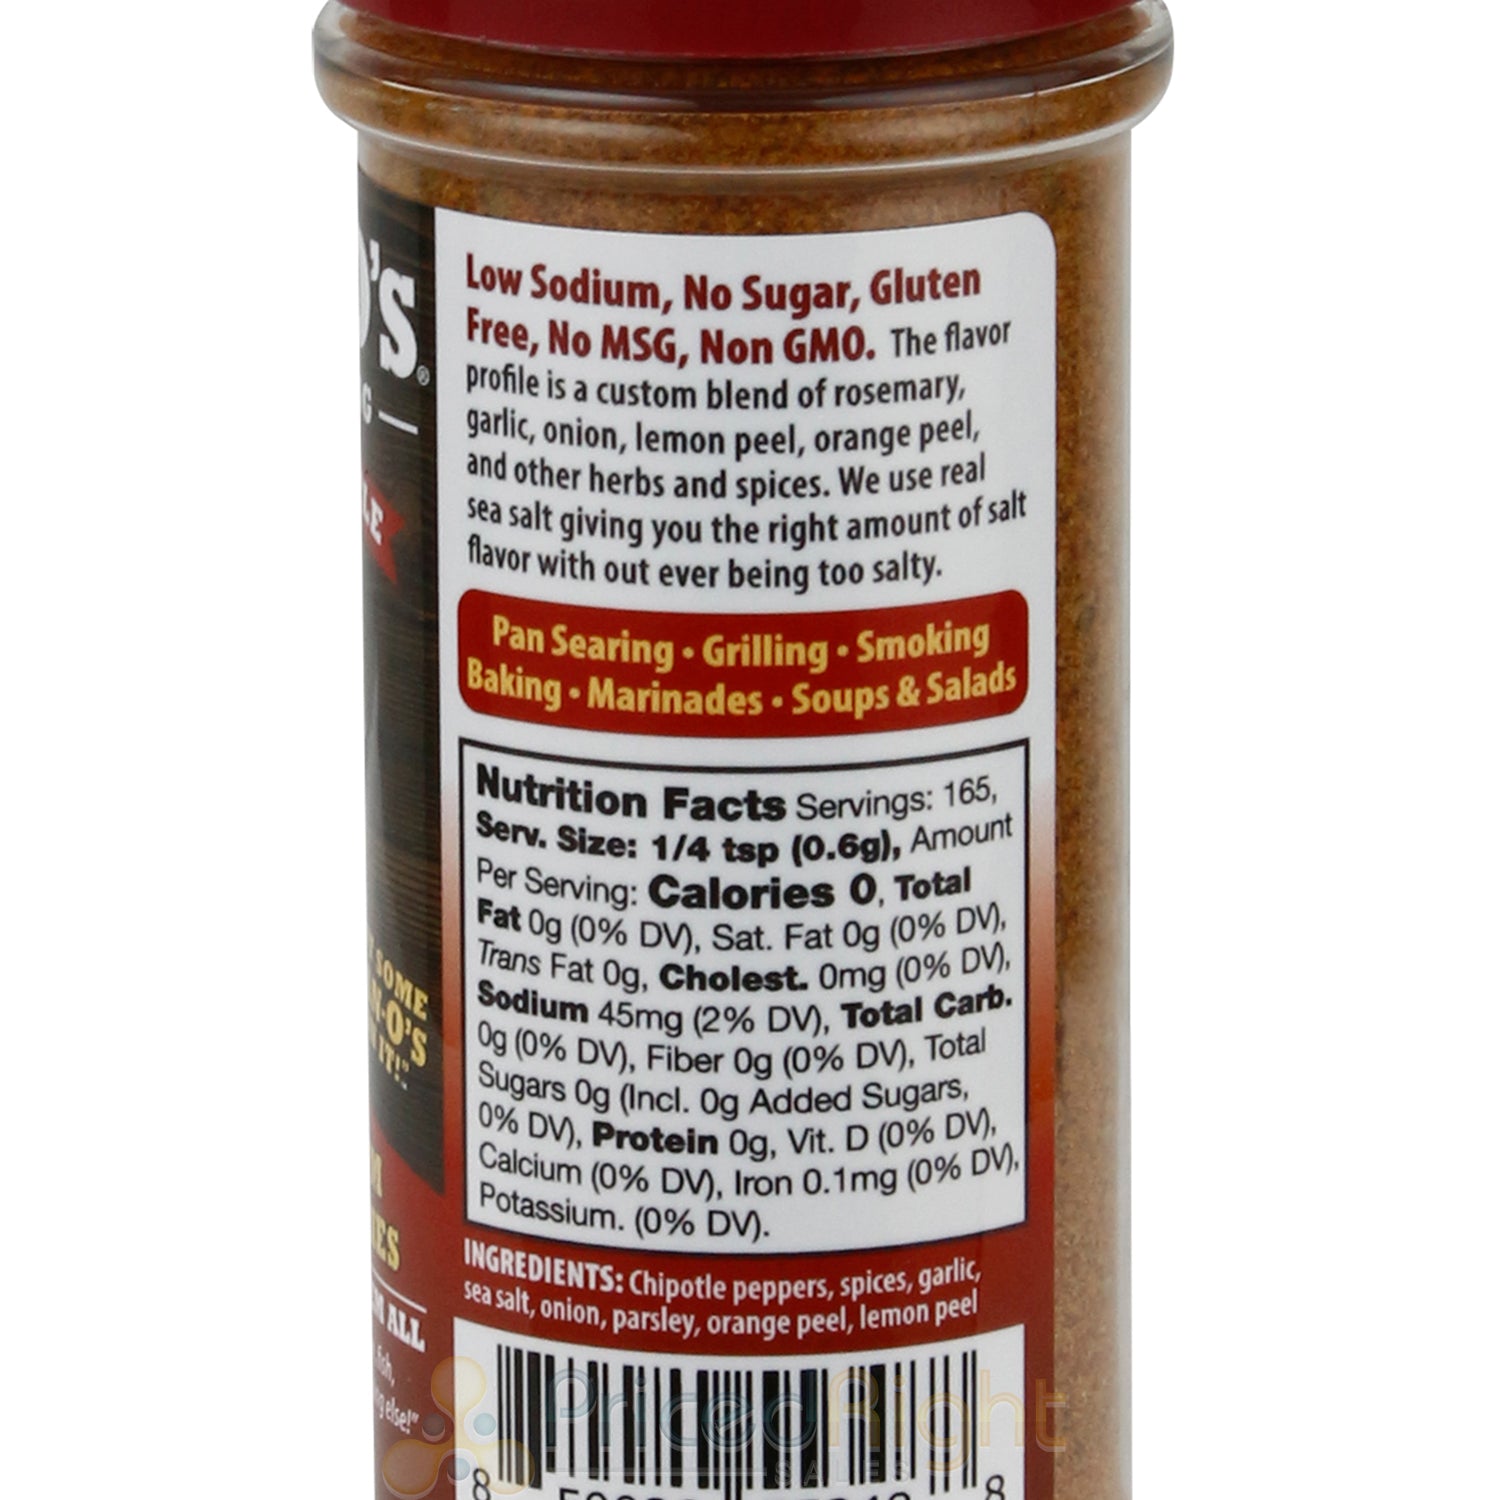 Southwest Spice Blend | Gourmet Spices with Sea Salt | Healthy to Add to  Any Dish | Low Sodium, No Gluten, No MSG, No-Sugar | 5oz